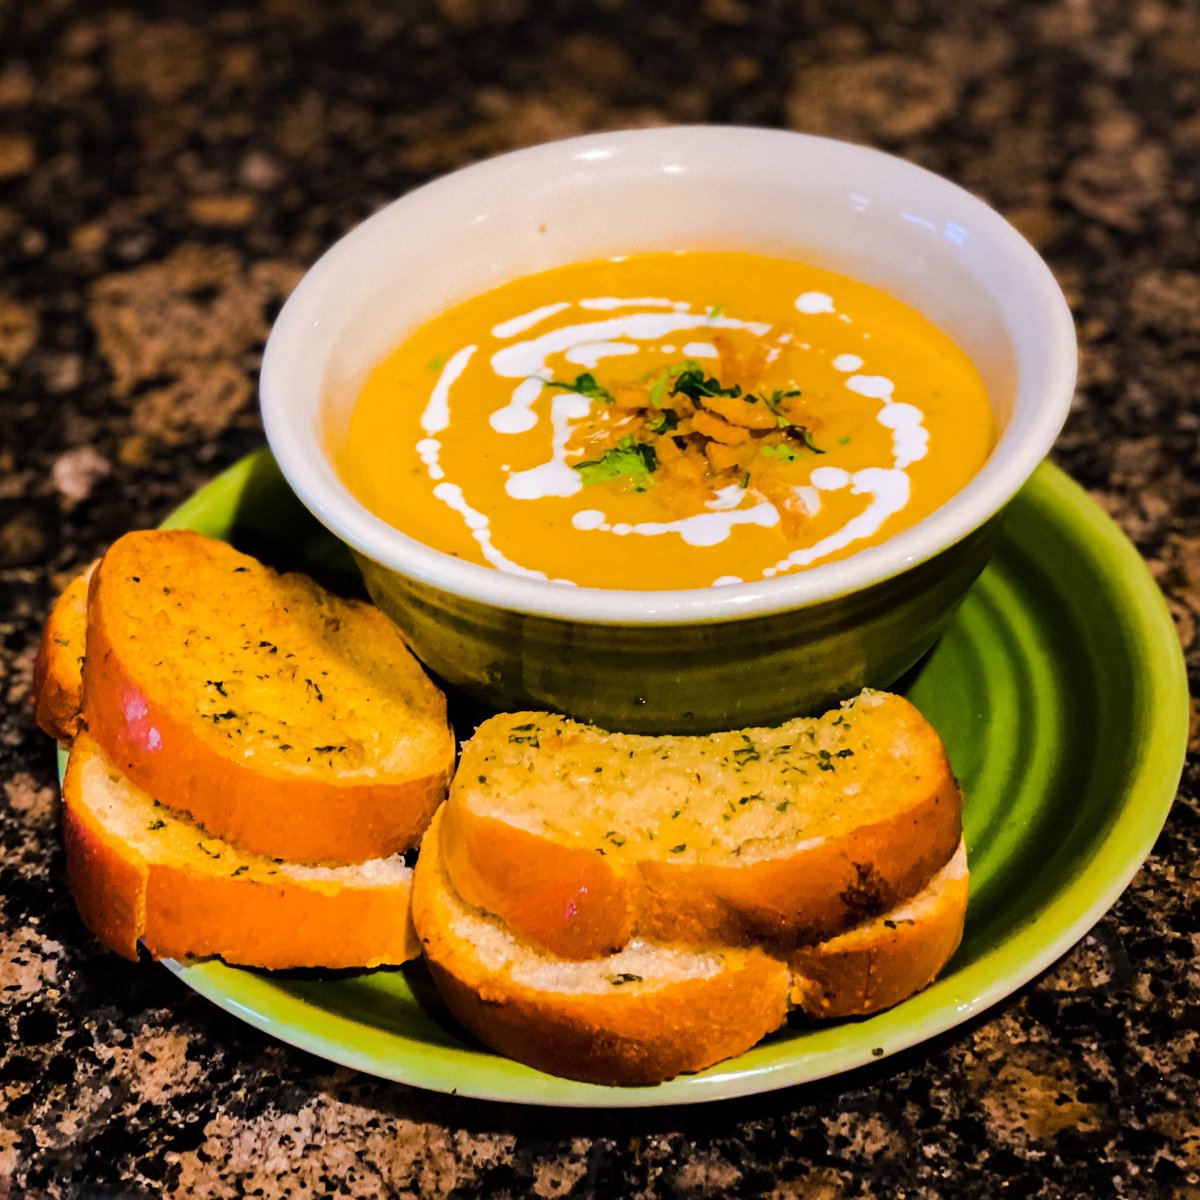 Creamy Butternut Squash soup served with Garlic Bread😍 #wintersquash #vegansoups #easydinner #comfortfood  #goodeats #holidayrecipes